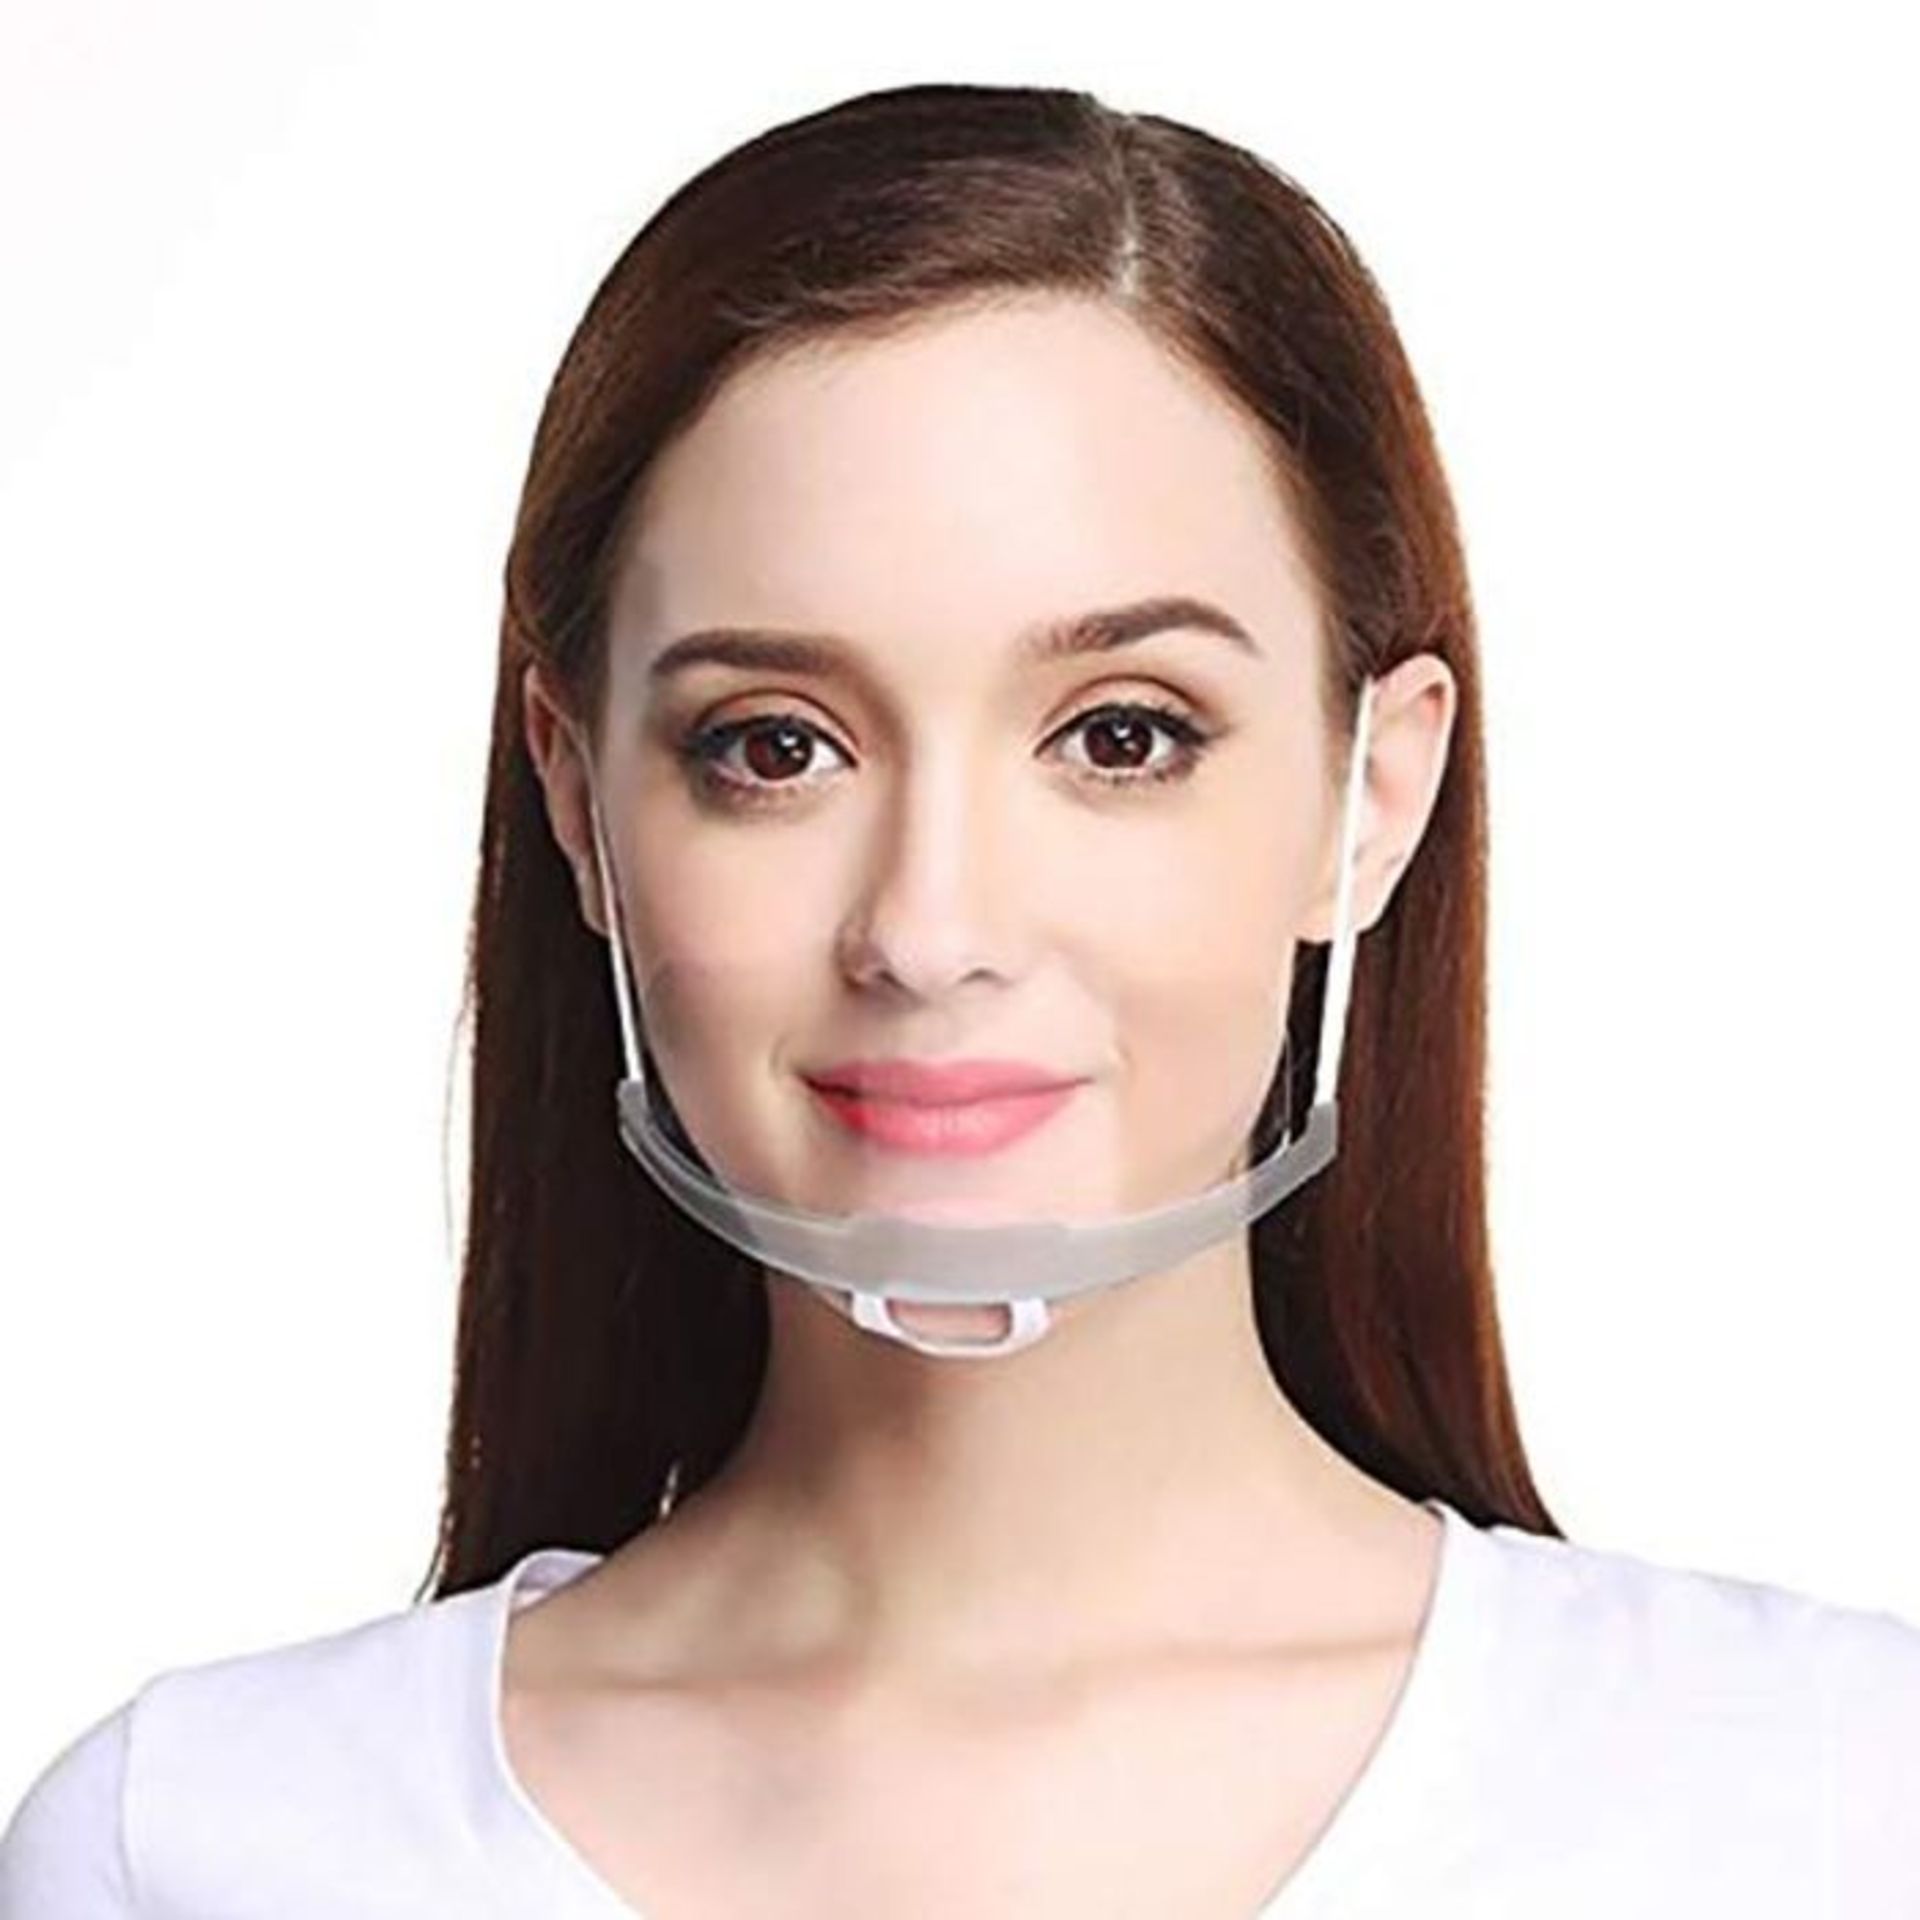 10 x Visor for Mouth and Nose PVC Plastic Mouth Shield Anti-Fog Universal Face Visor f